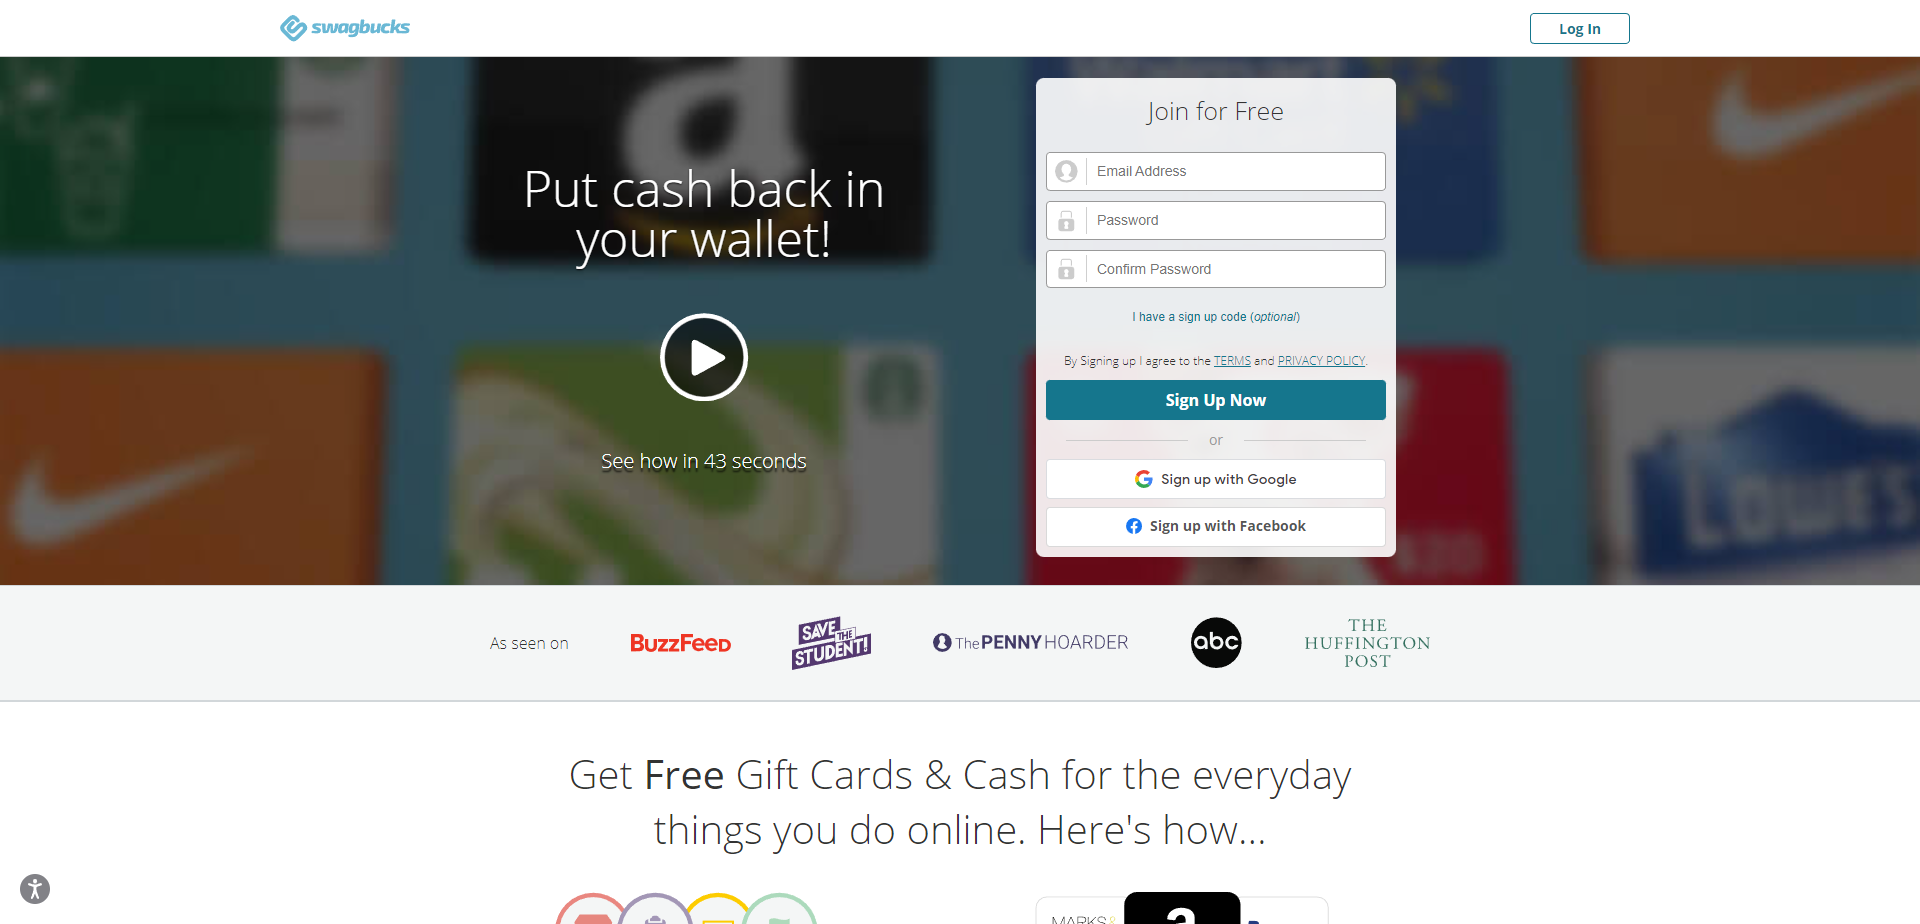 Referral Landing Page for Swagbucks